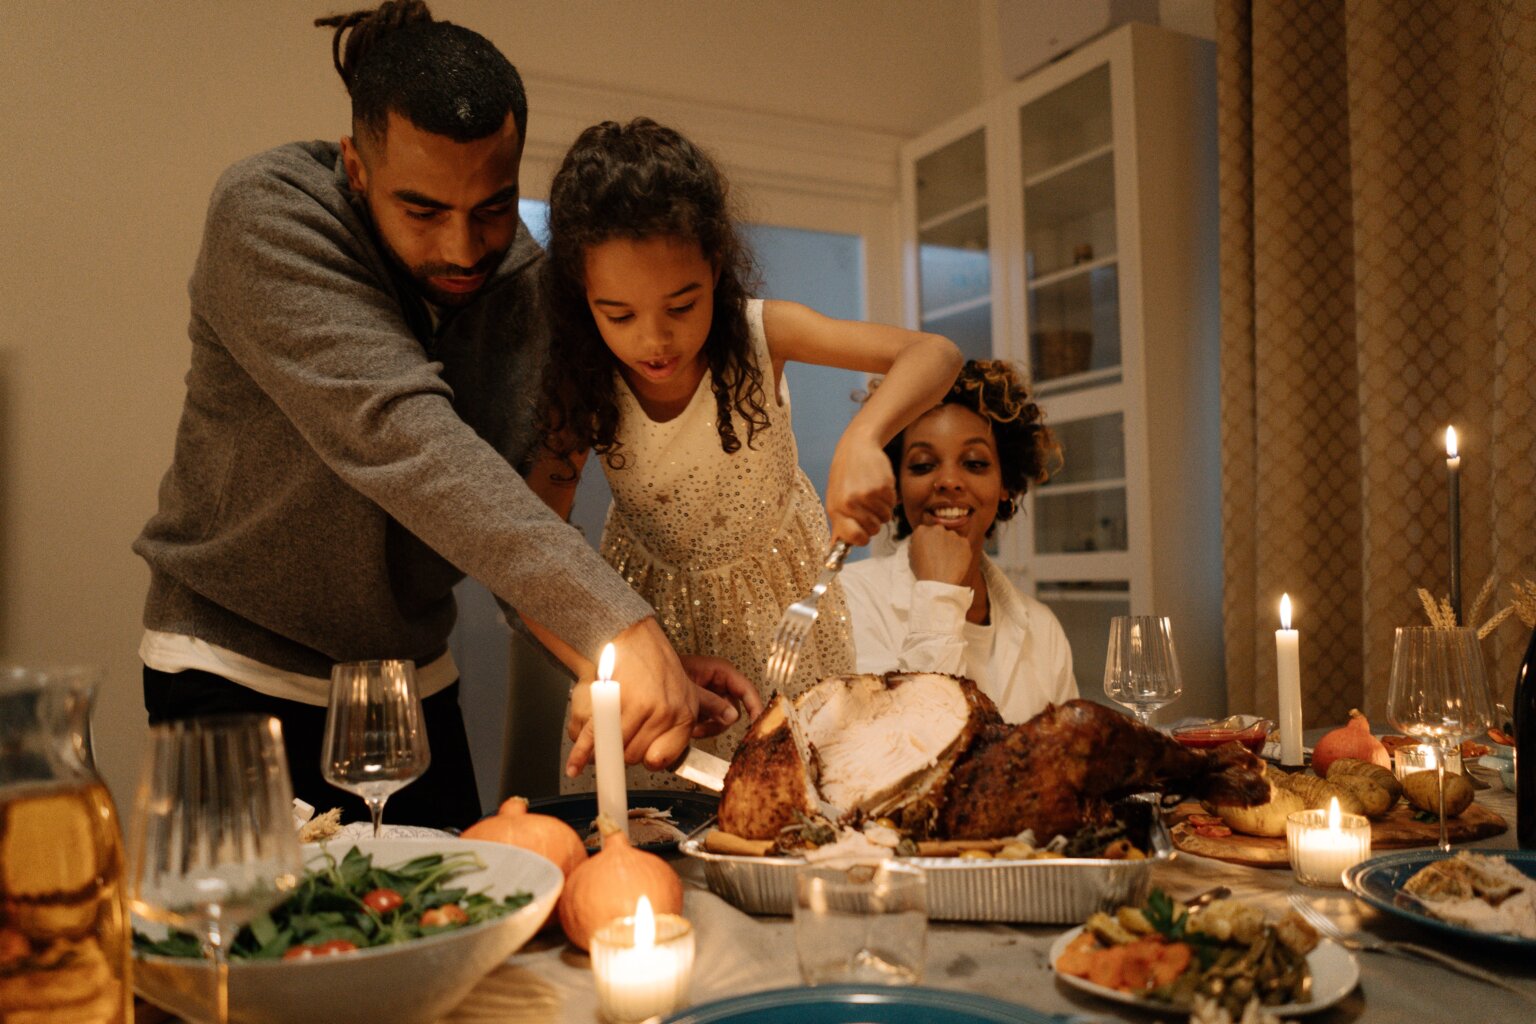 A dad helping his daughter carve a turkey at Thanksgiving dinner while the mom watches.